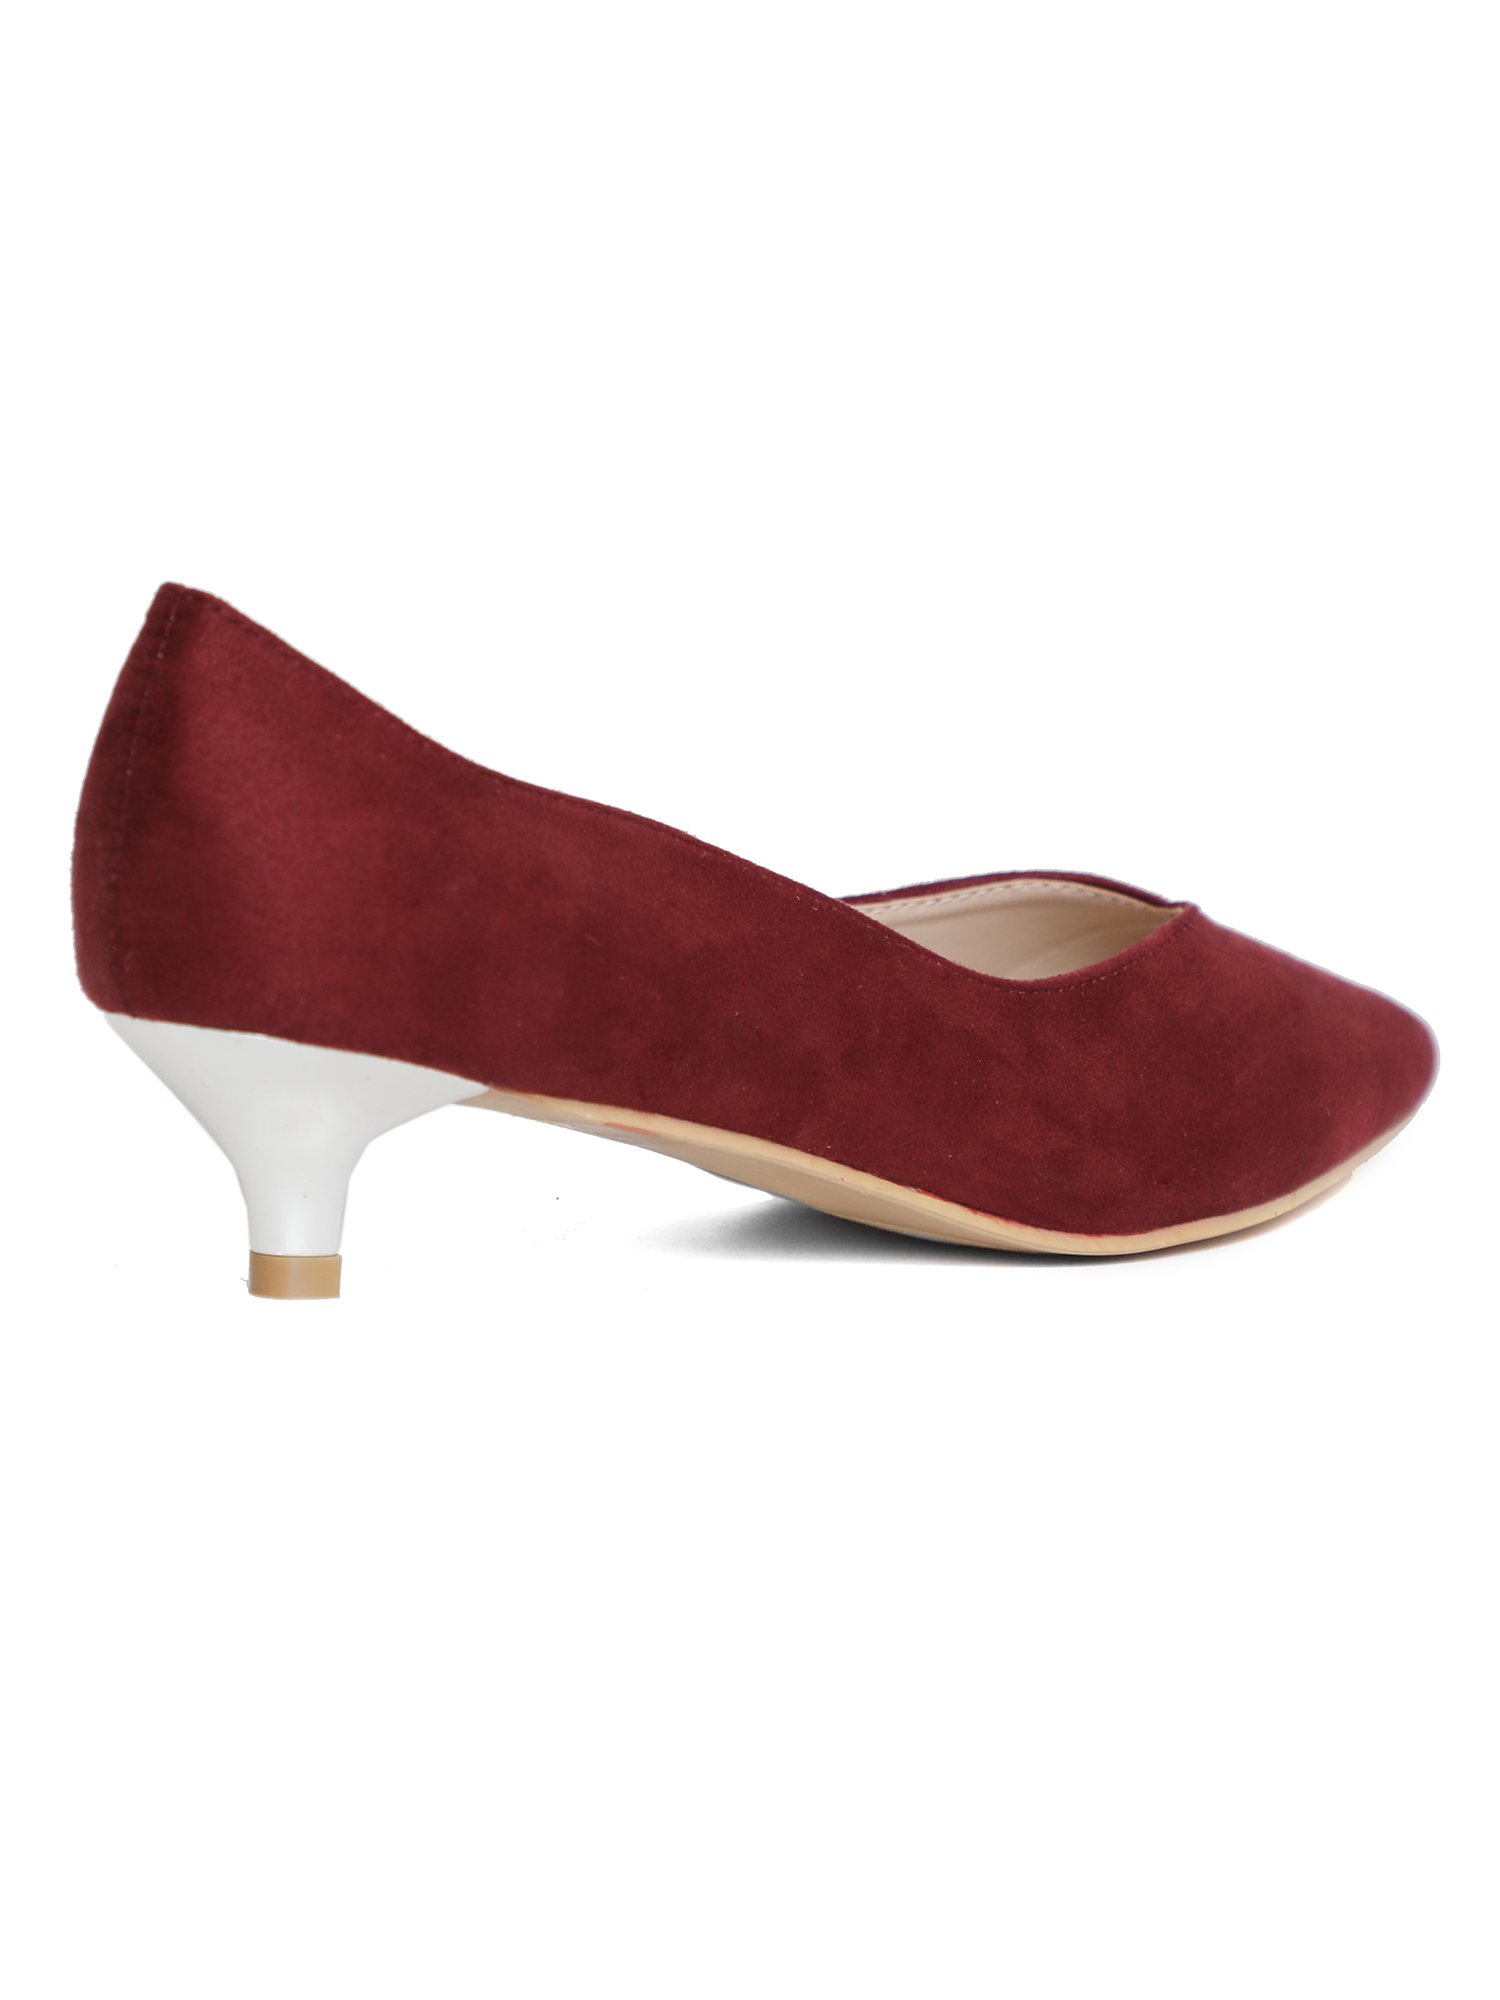 Chrome-accented Pointed Toe Women's Kitten Heels in Burgundy - image 3 of 3